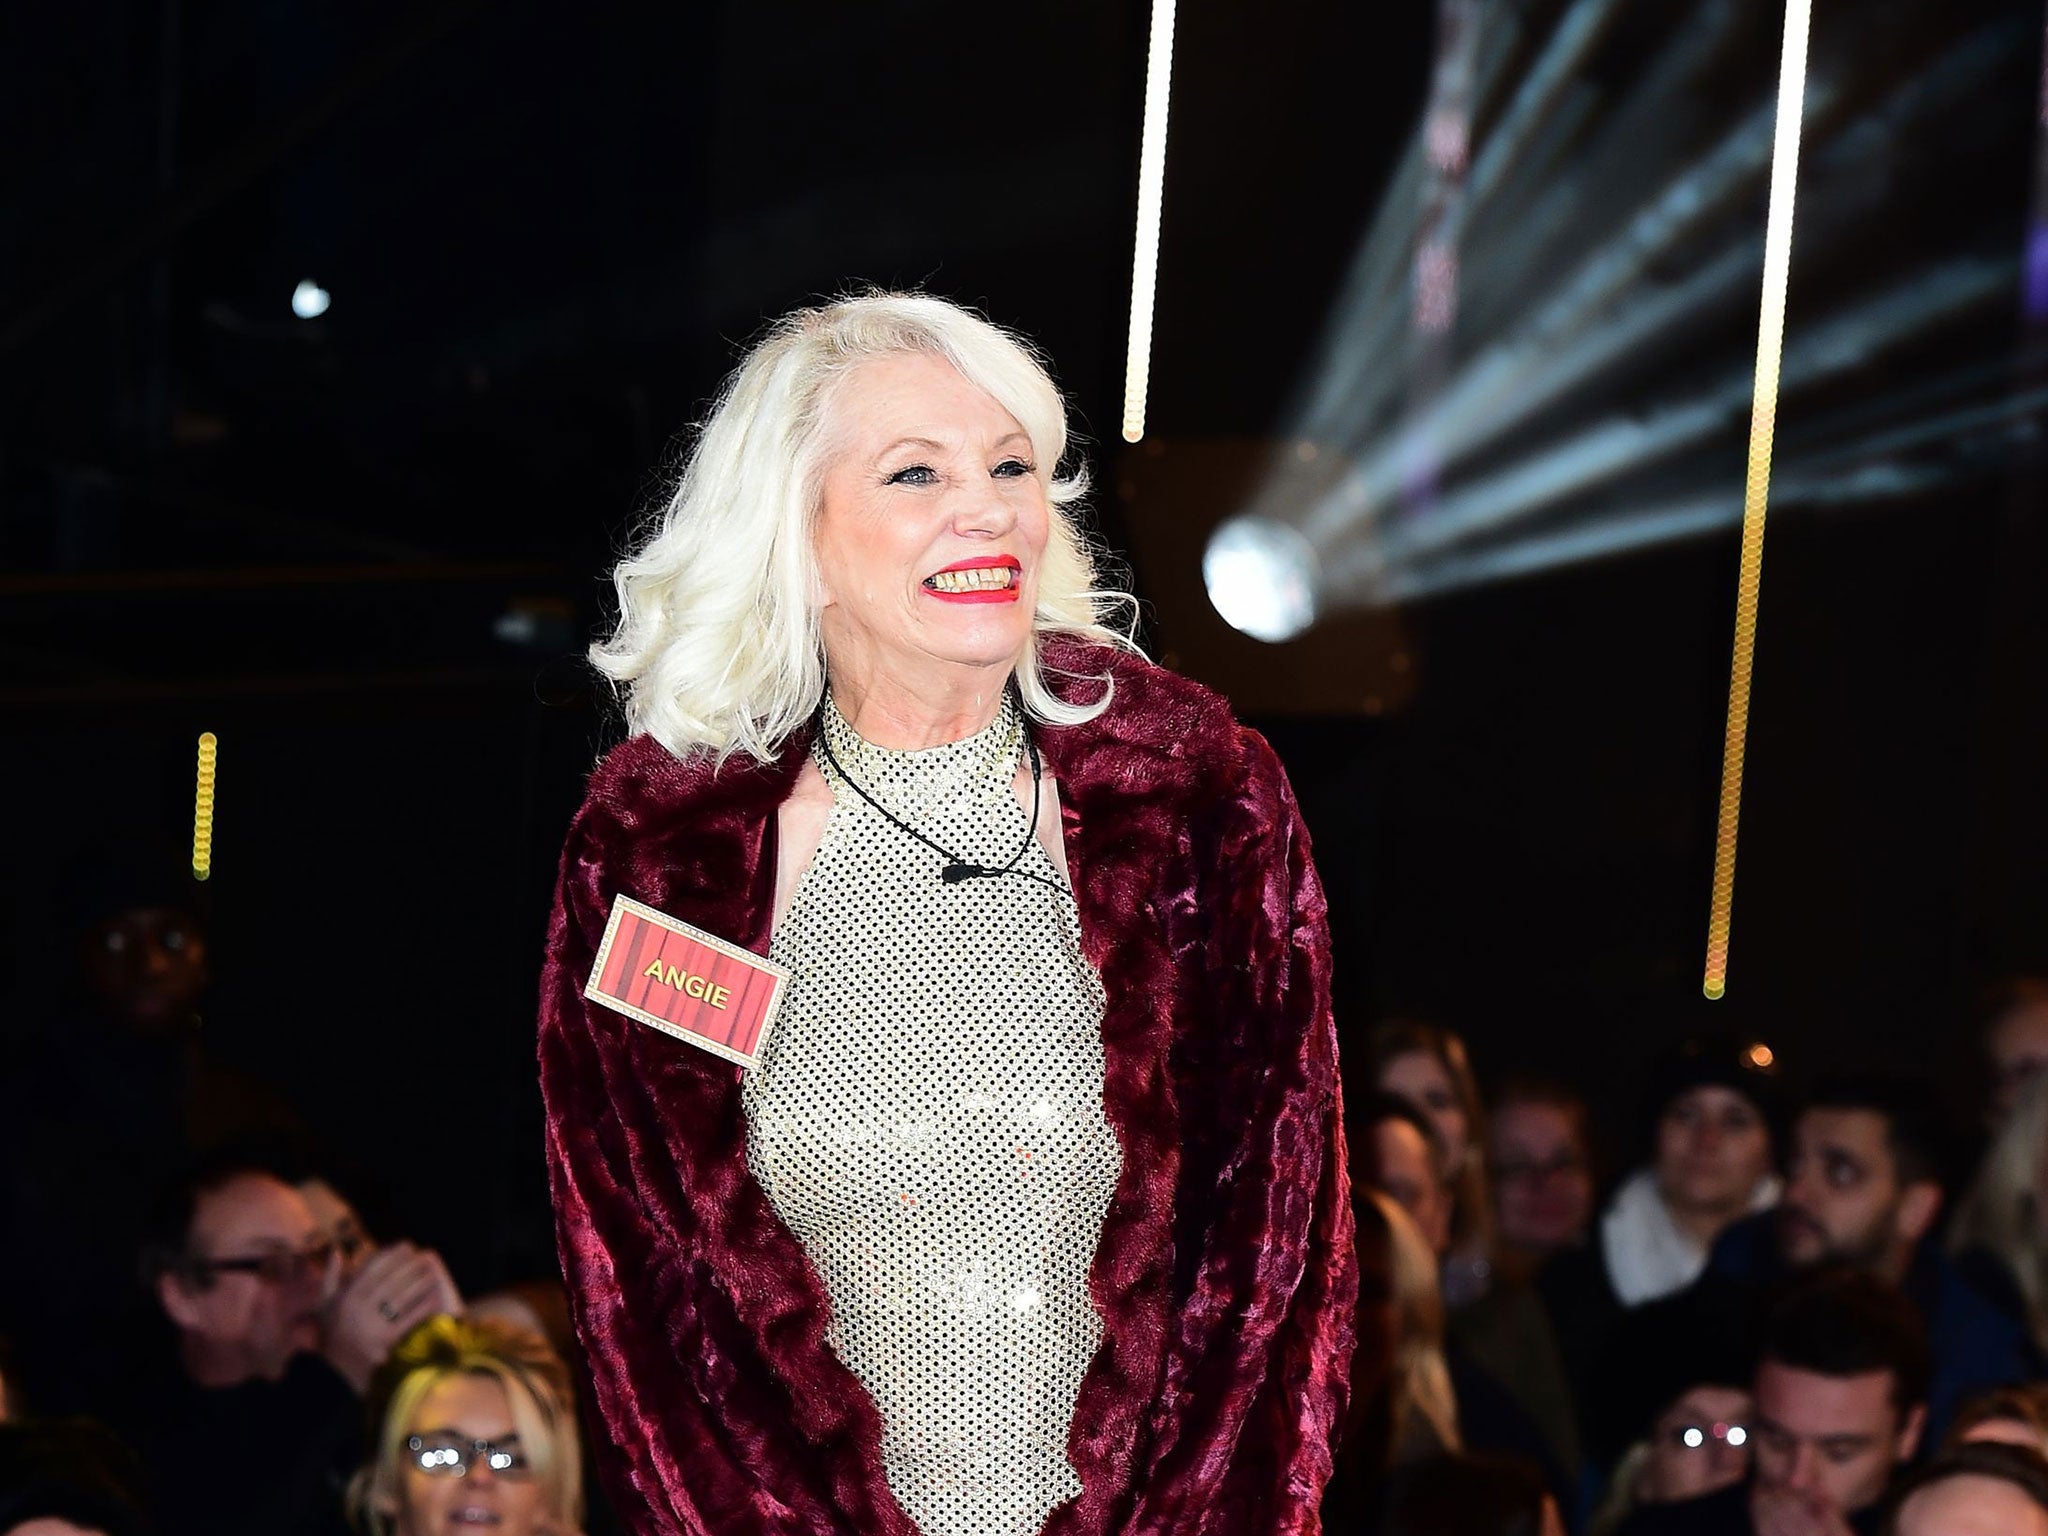 Angie Bowie has decided to remain in the Celebrity Big Brother house